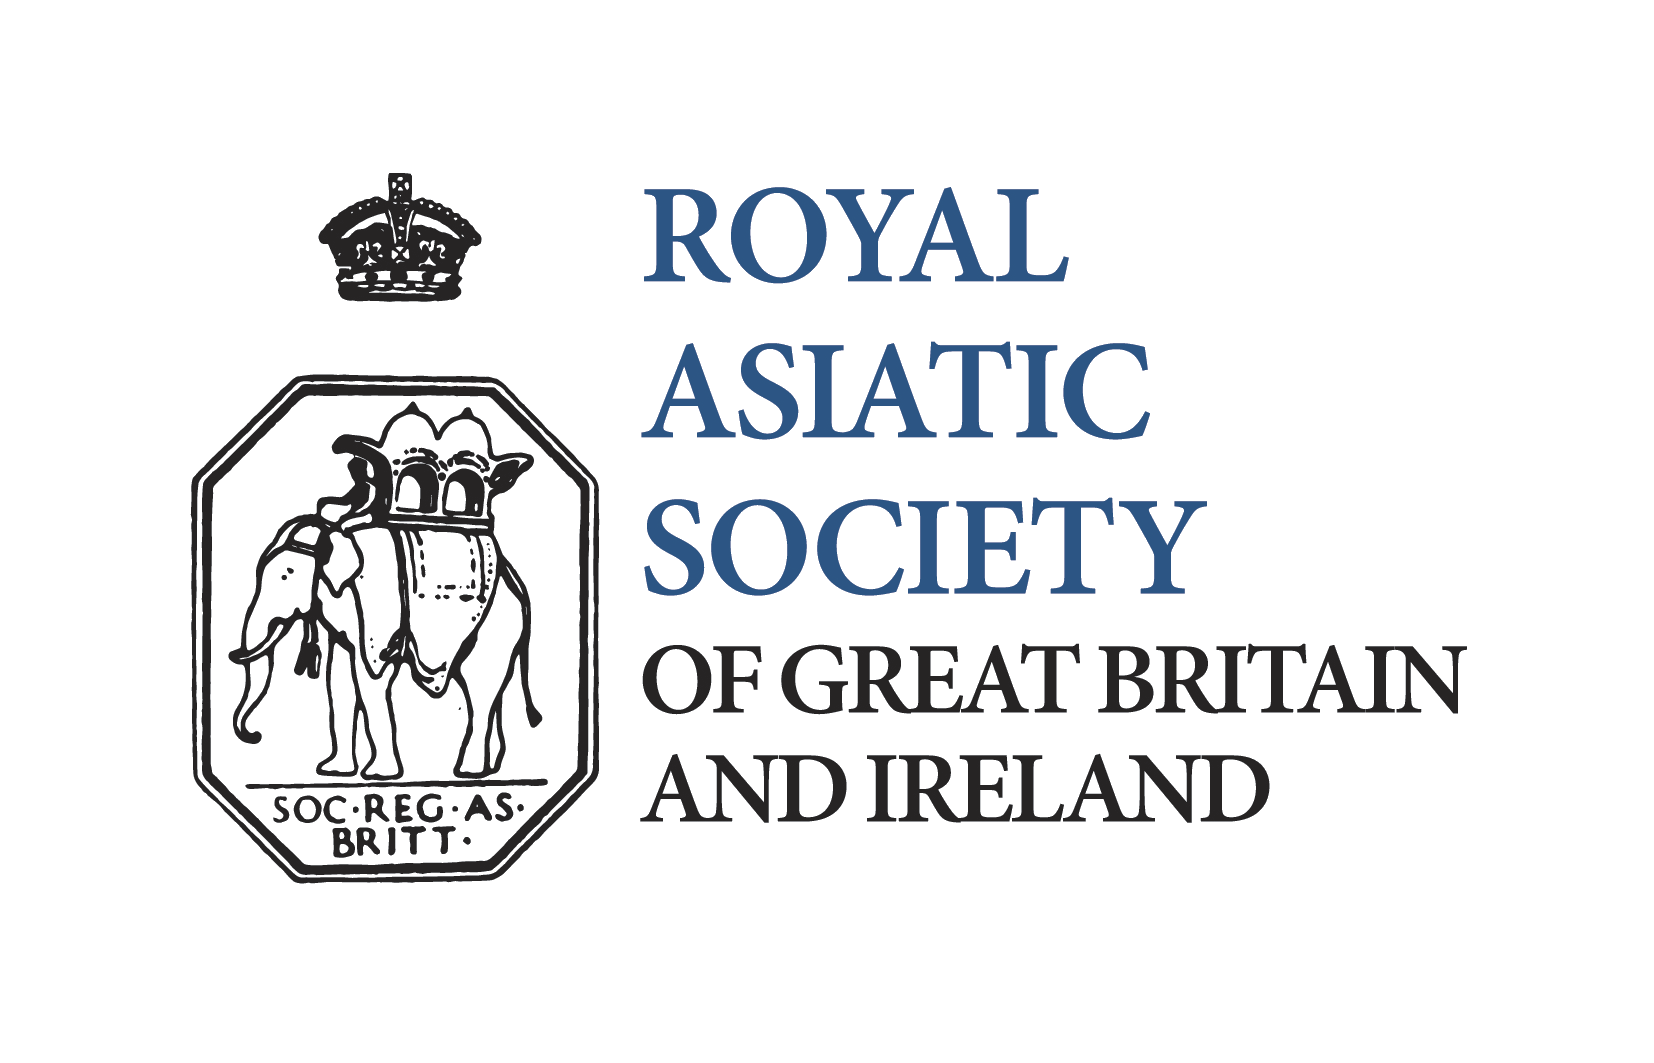 Royal Asiatic Society A Forum For Those Who Are Interested In The History Languages Cultures And Regions Of Asia